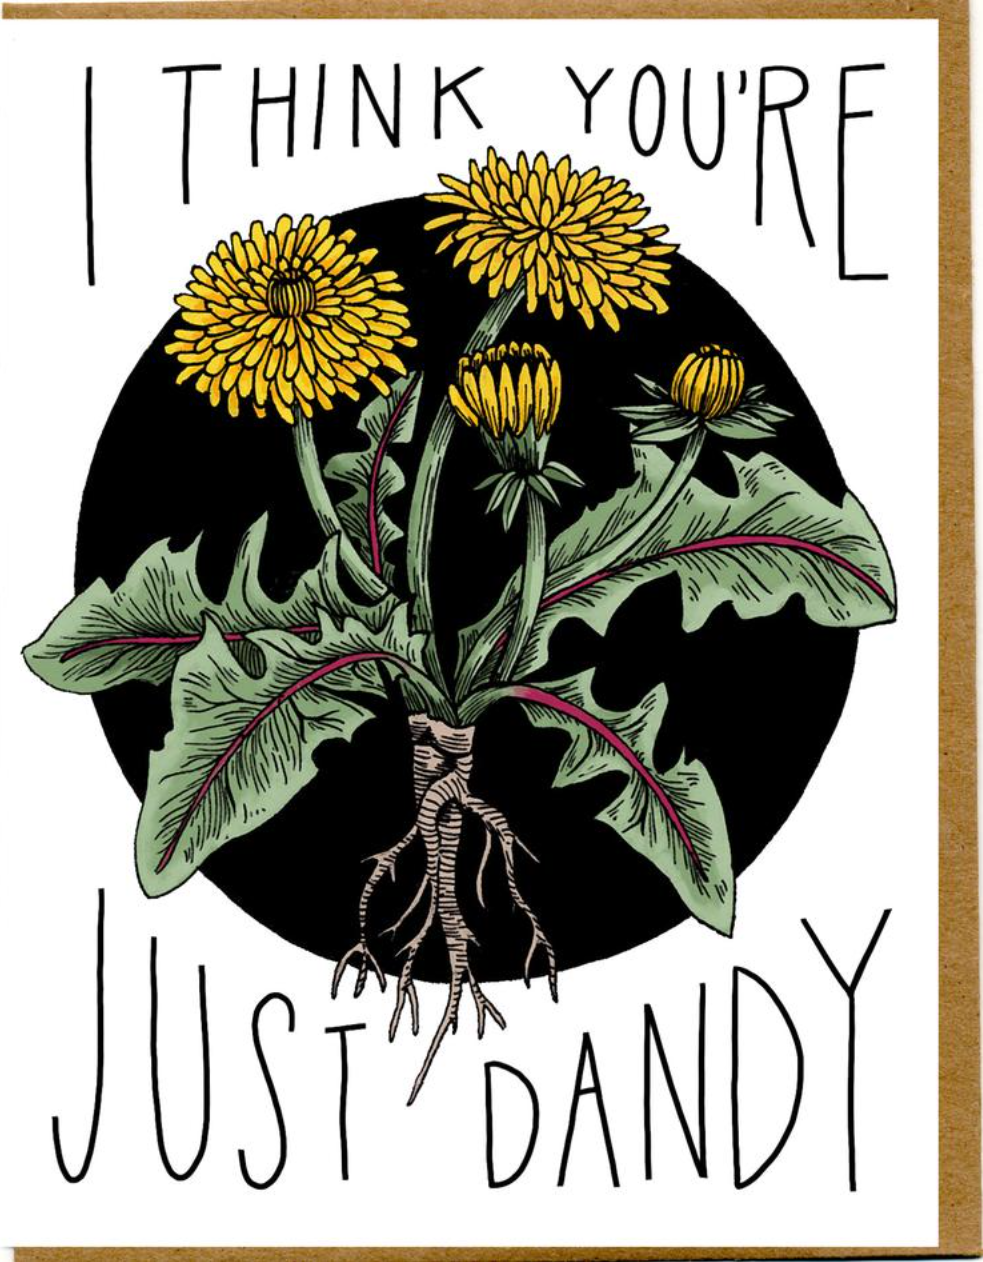 •YOU'RE JUST DANDY• affection card